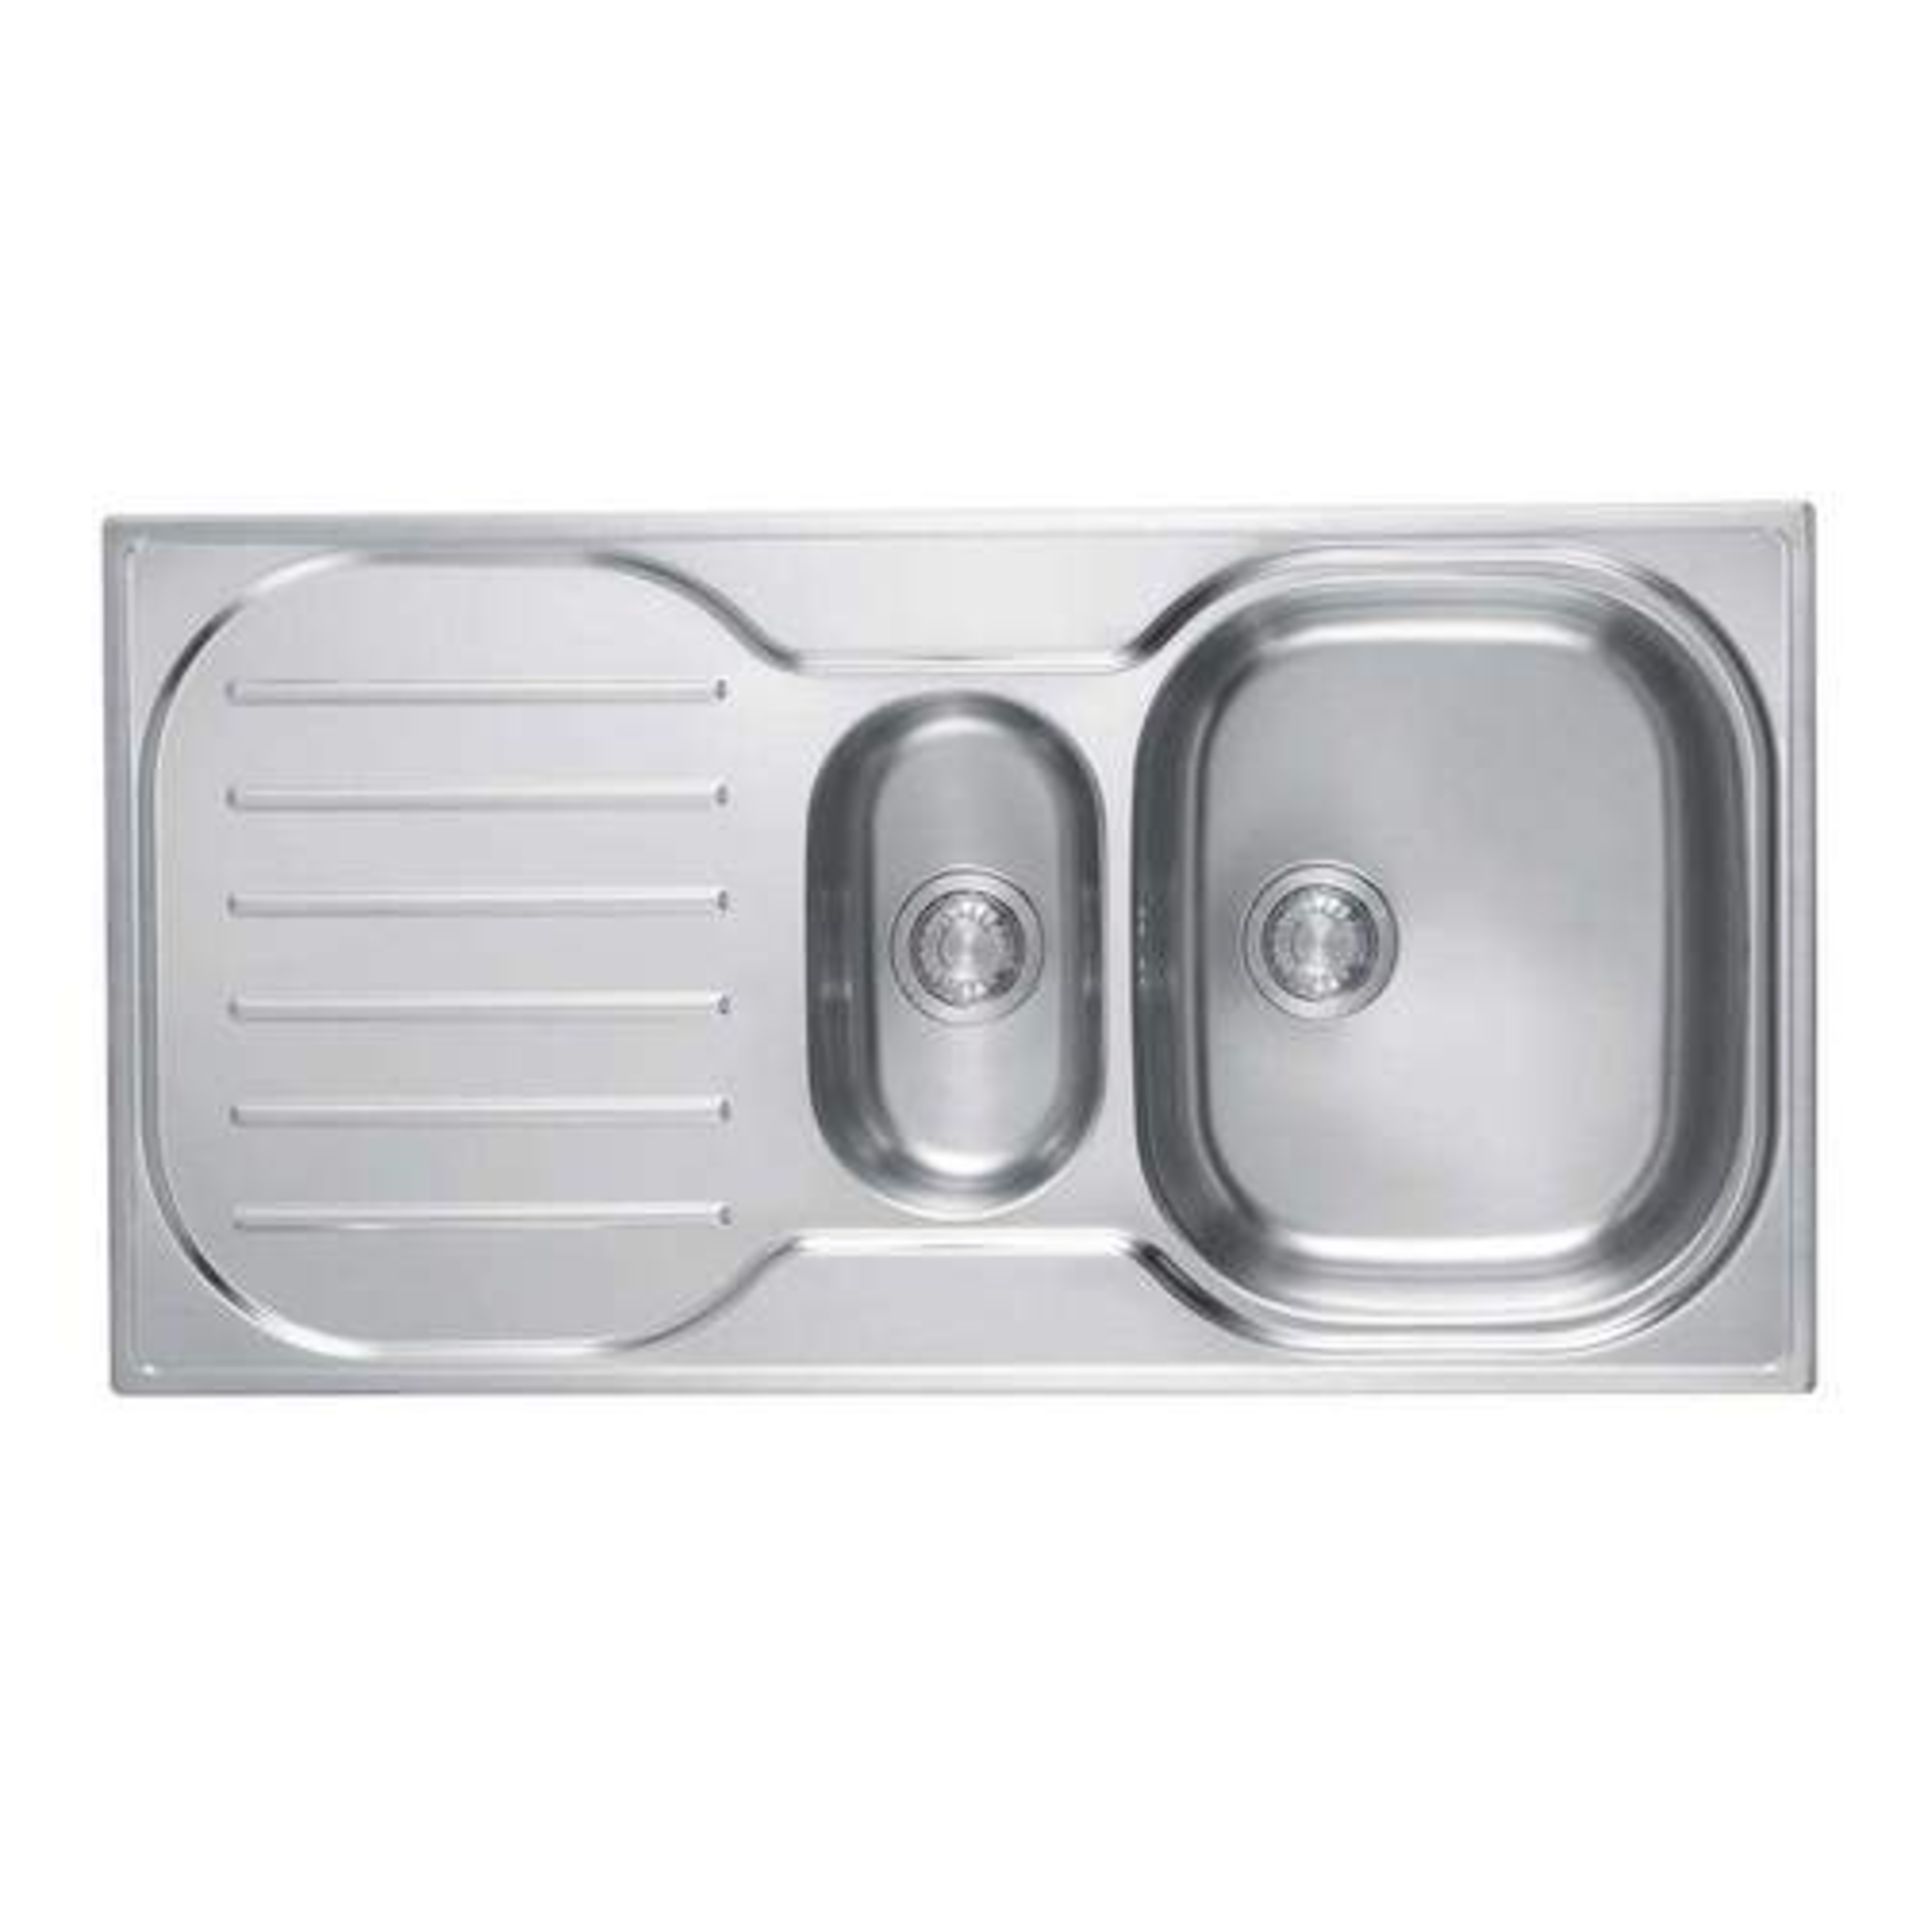 NEW (FR24) 3 X Franke Compact CRX P 651 Reversible Stainless Steel 1.5 Bowl Inset Sink | 101.0049.